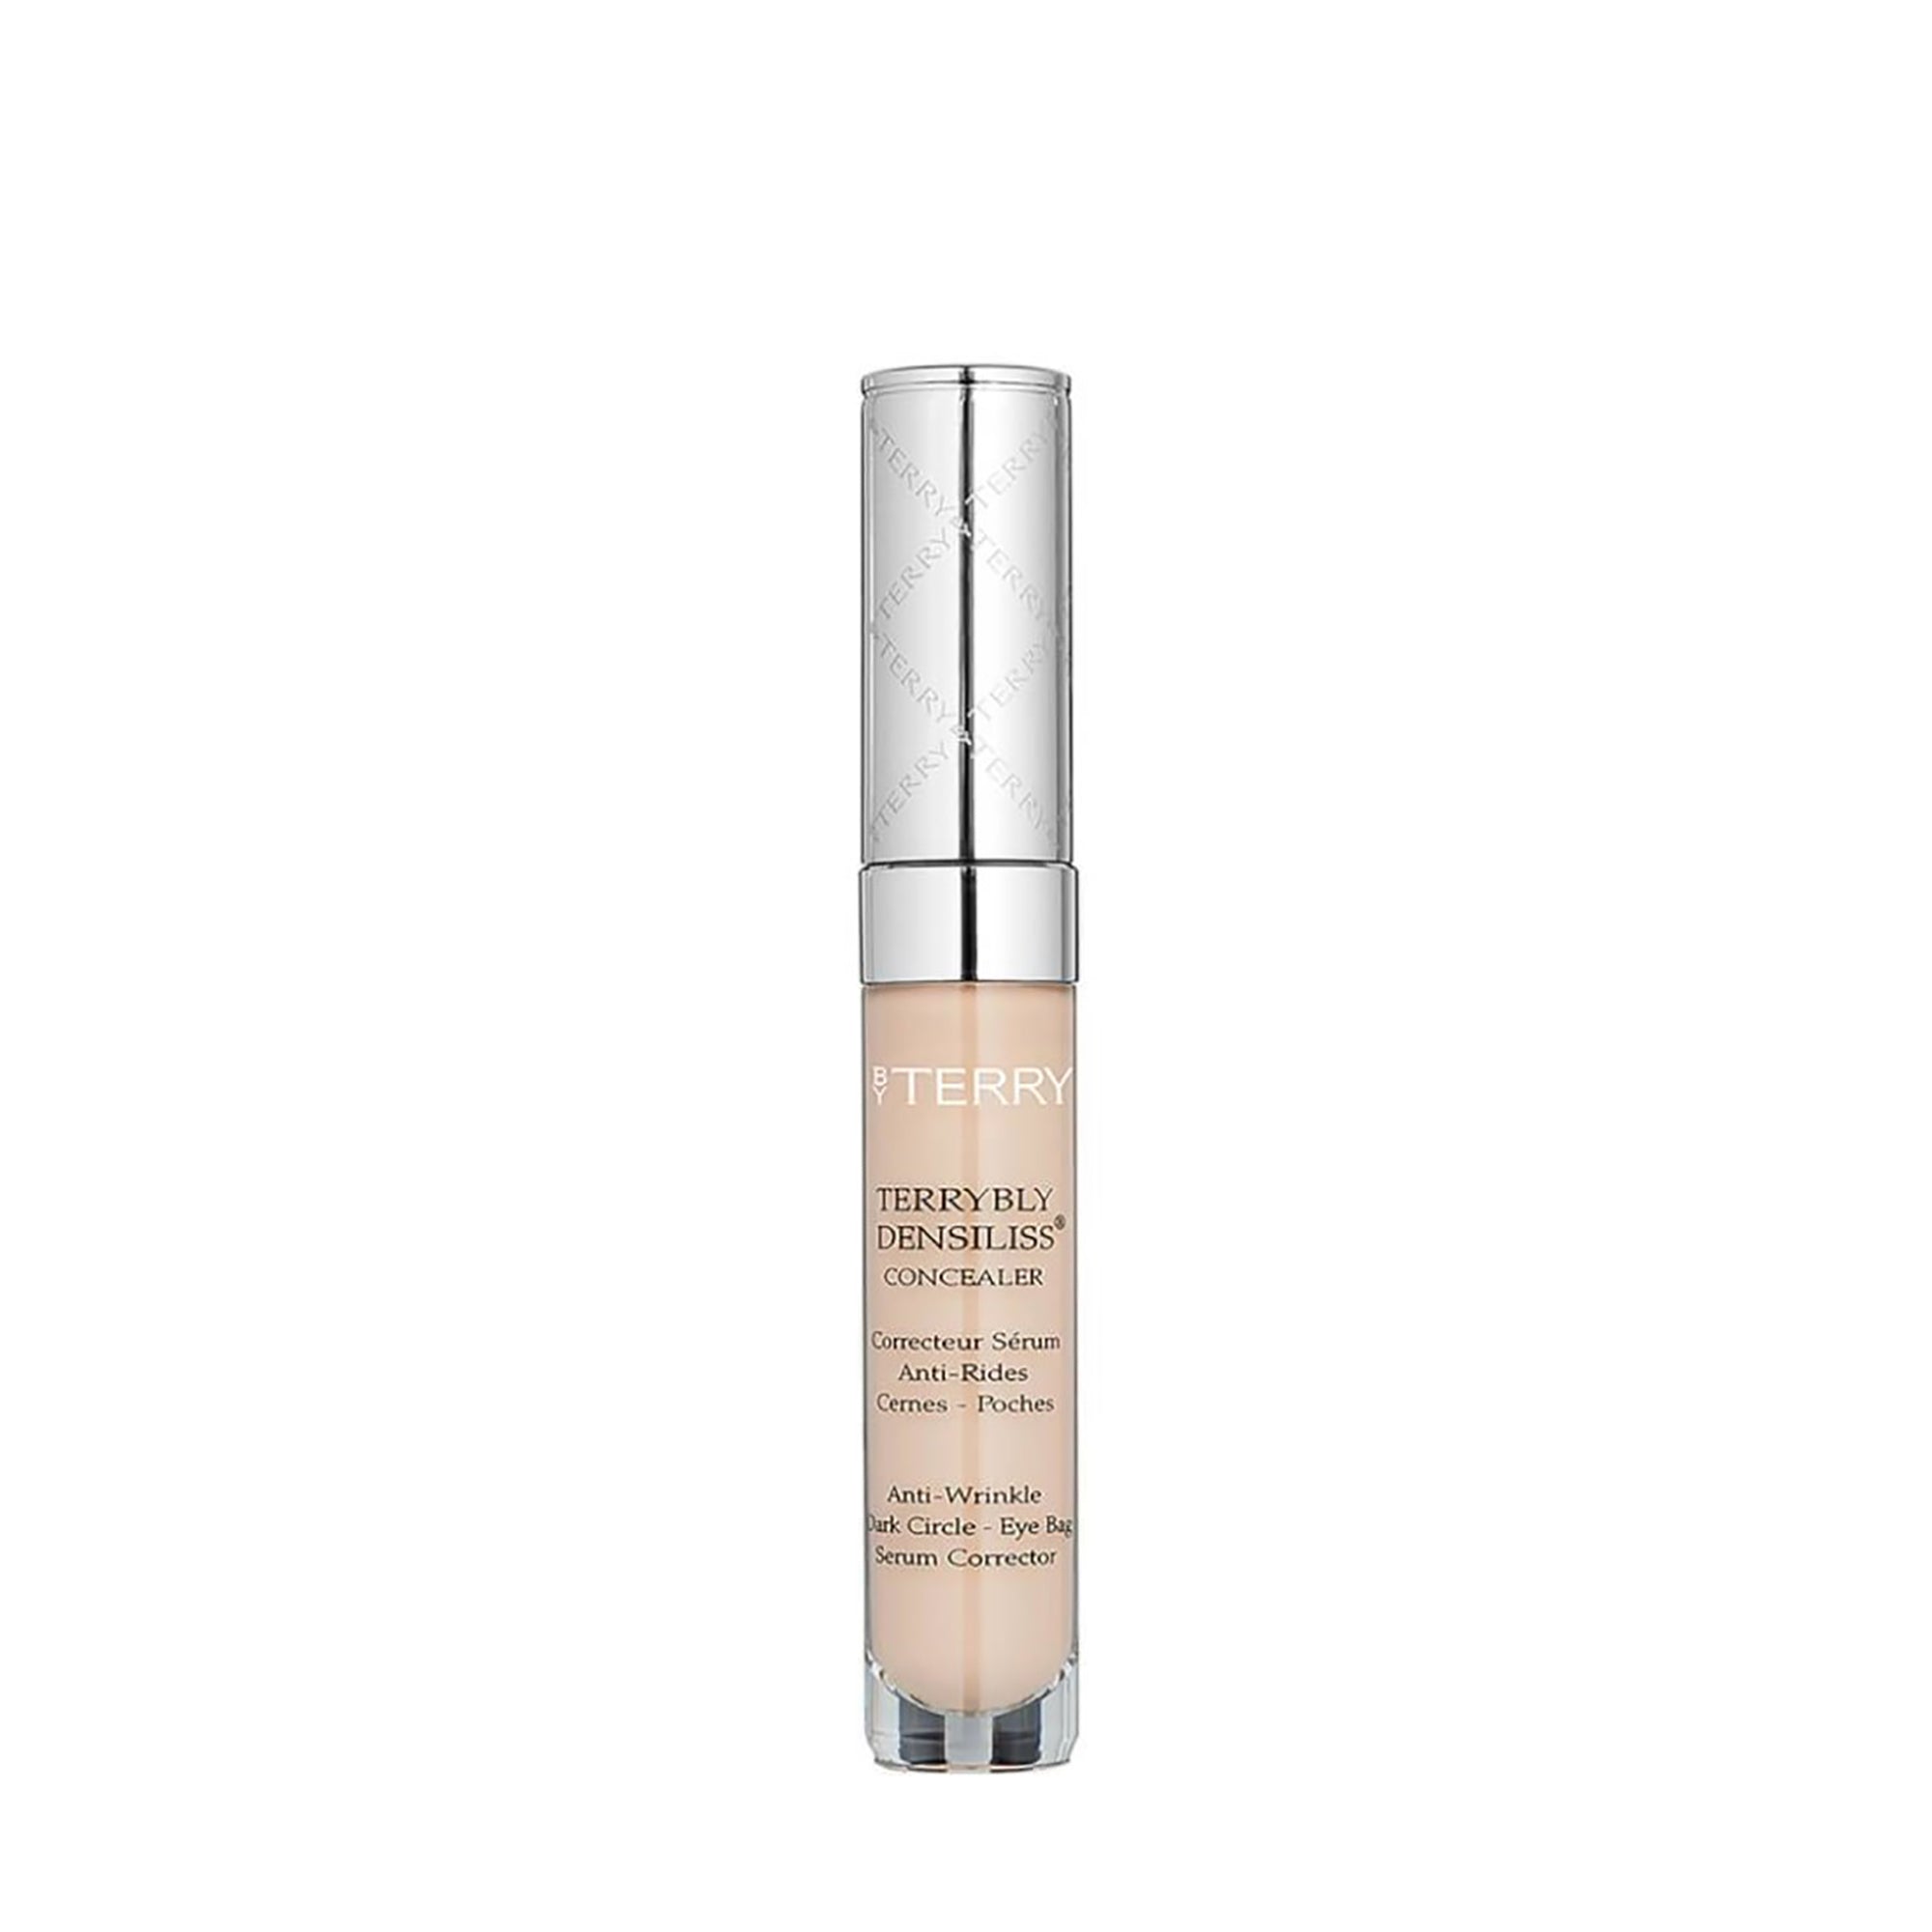 By Terry Terrybly Densiliss Anti-Wrinkle Concealer #2 Vanilla Beige